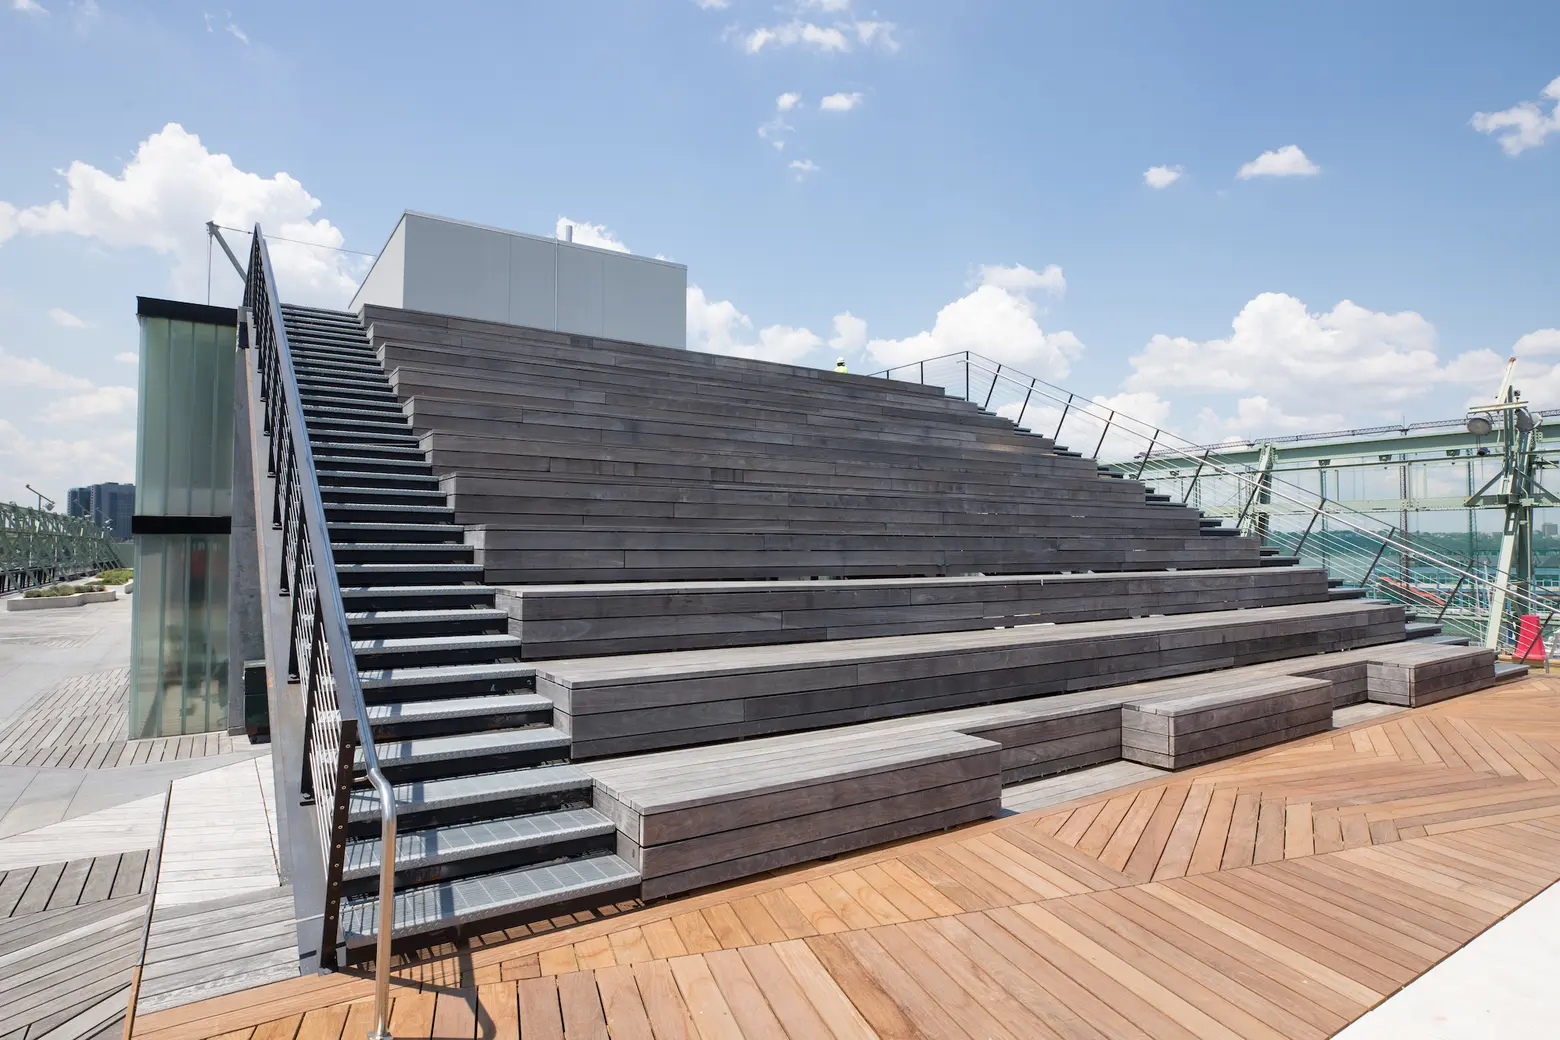 New two-acre rooftop public park opens at Pier 57 in Chelsea